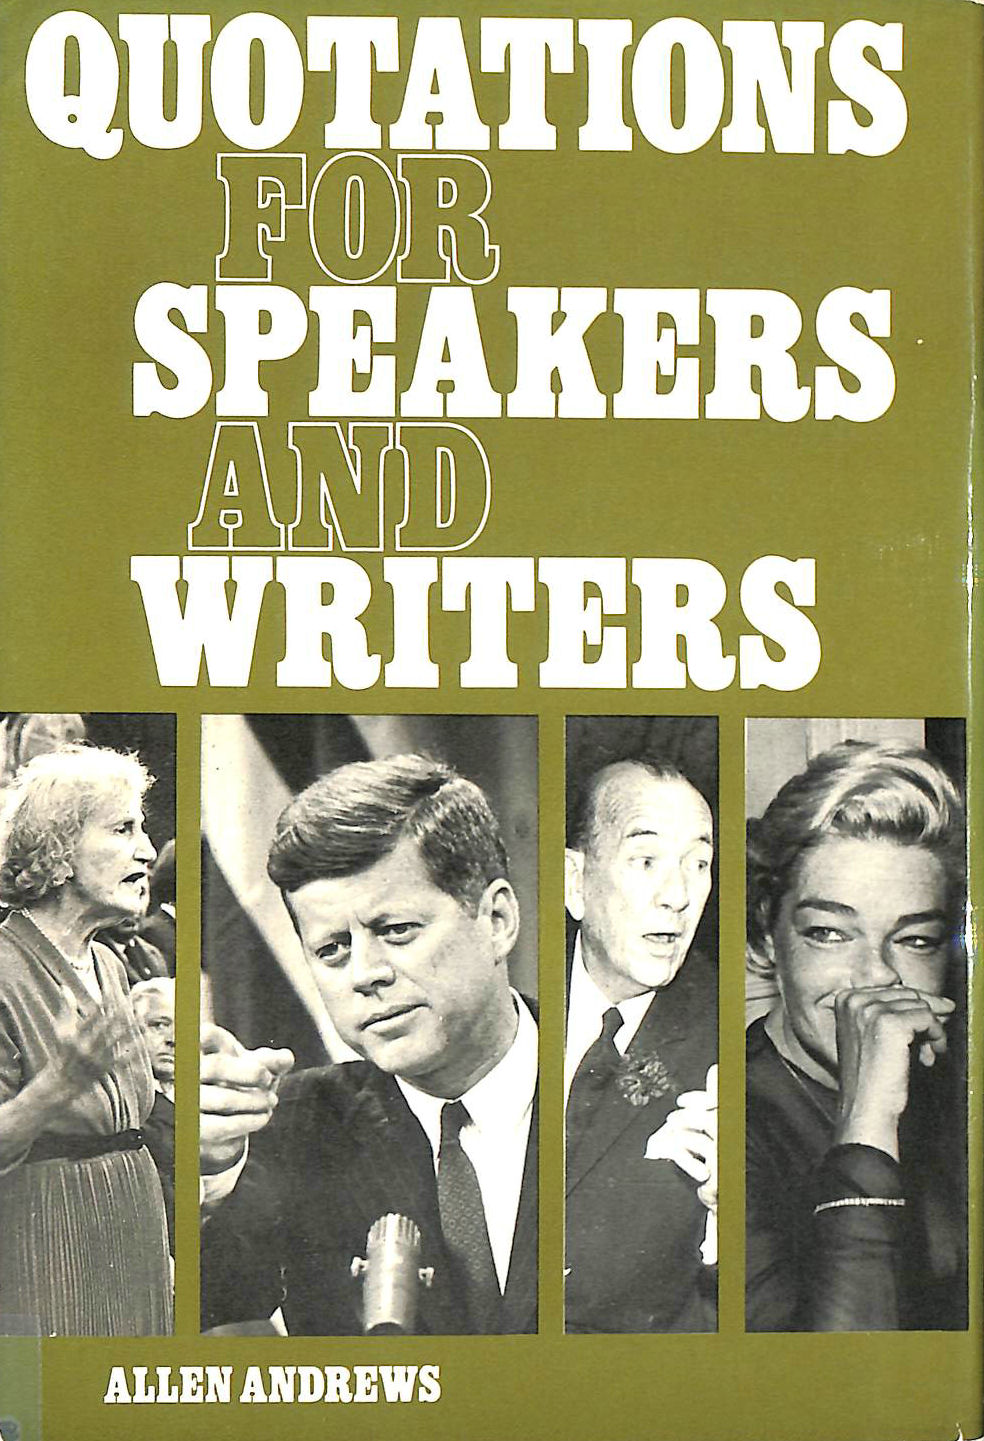 ANDREWS, ALLEN [EDITOR] - Quotations for Speakers and Writers